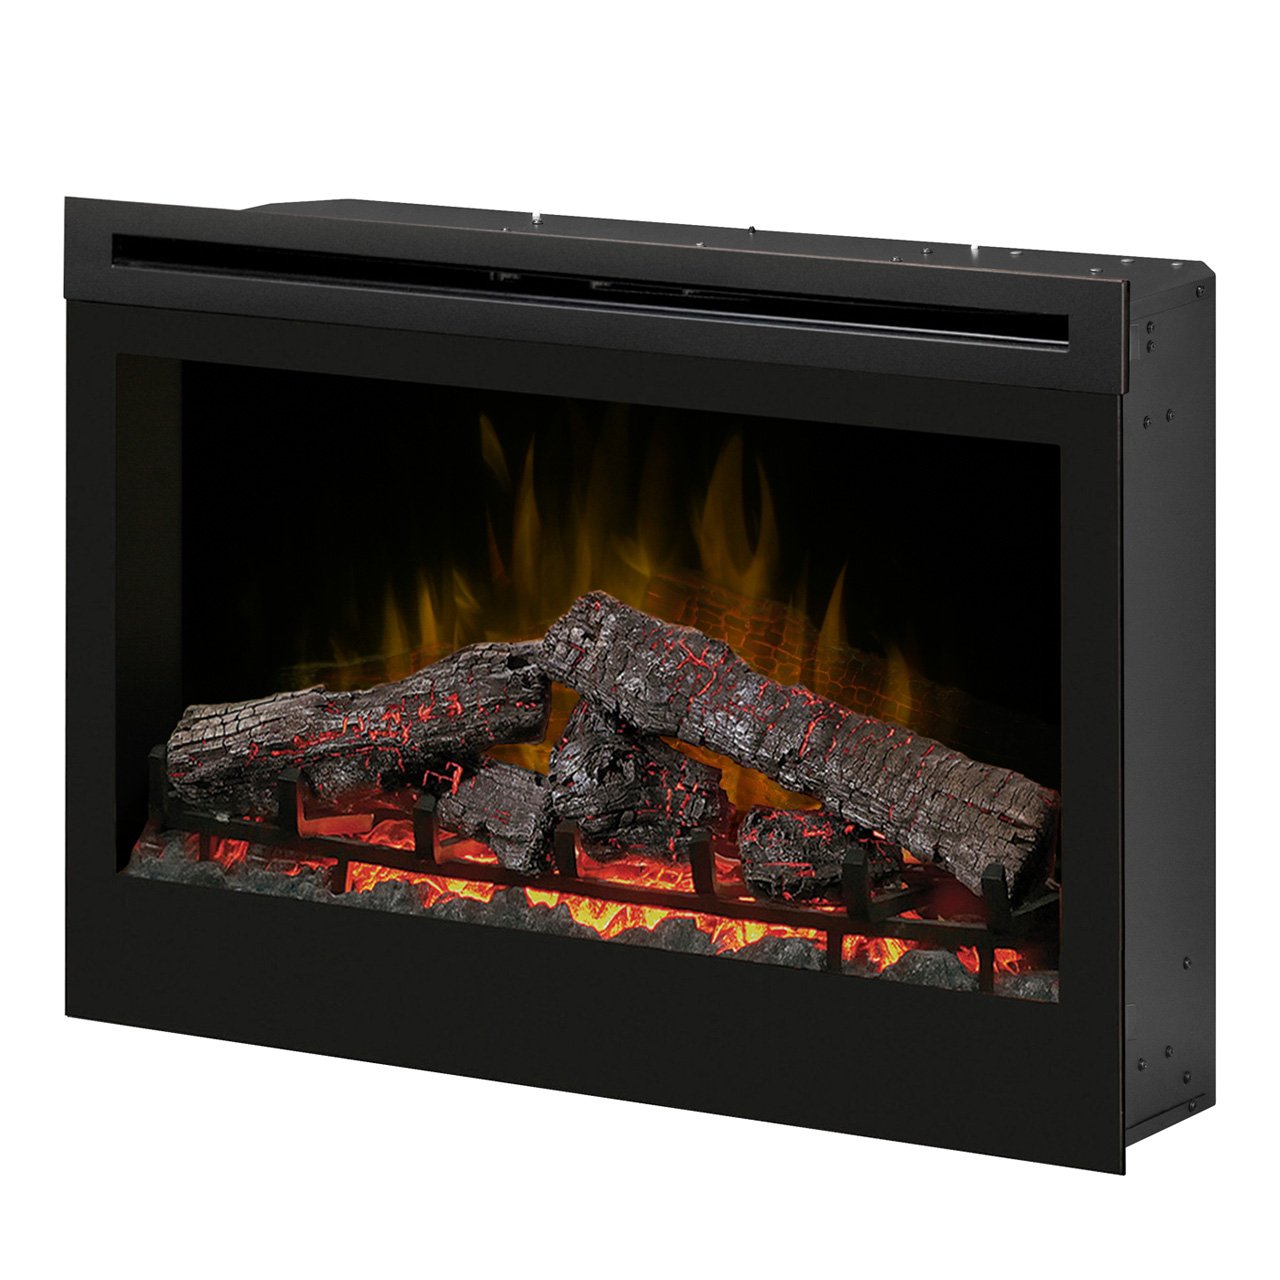 Fireplace Backing Lovely Dimplex Df3033st 33 Inch Self Trimming Electric Fireplace Insert